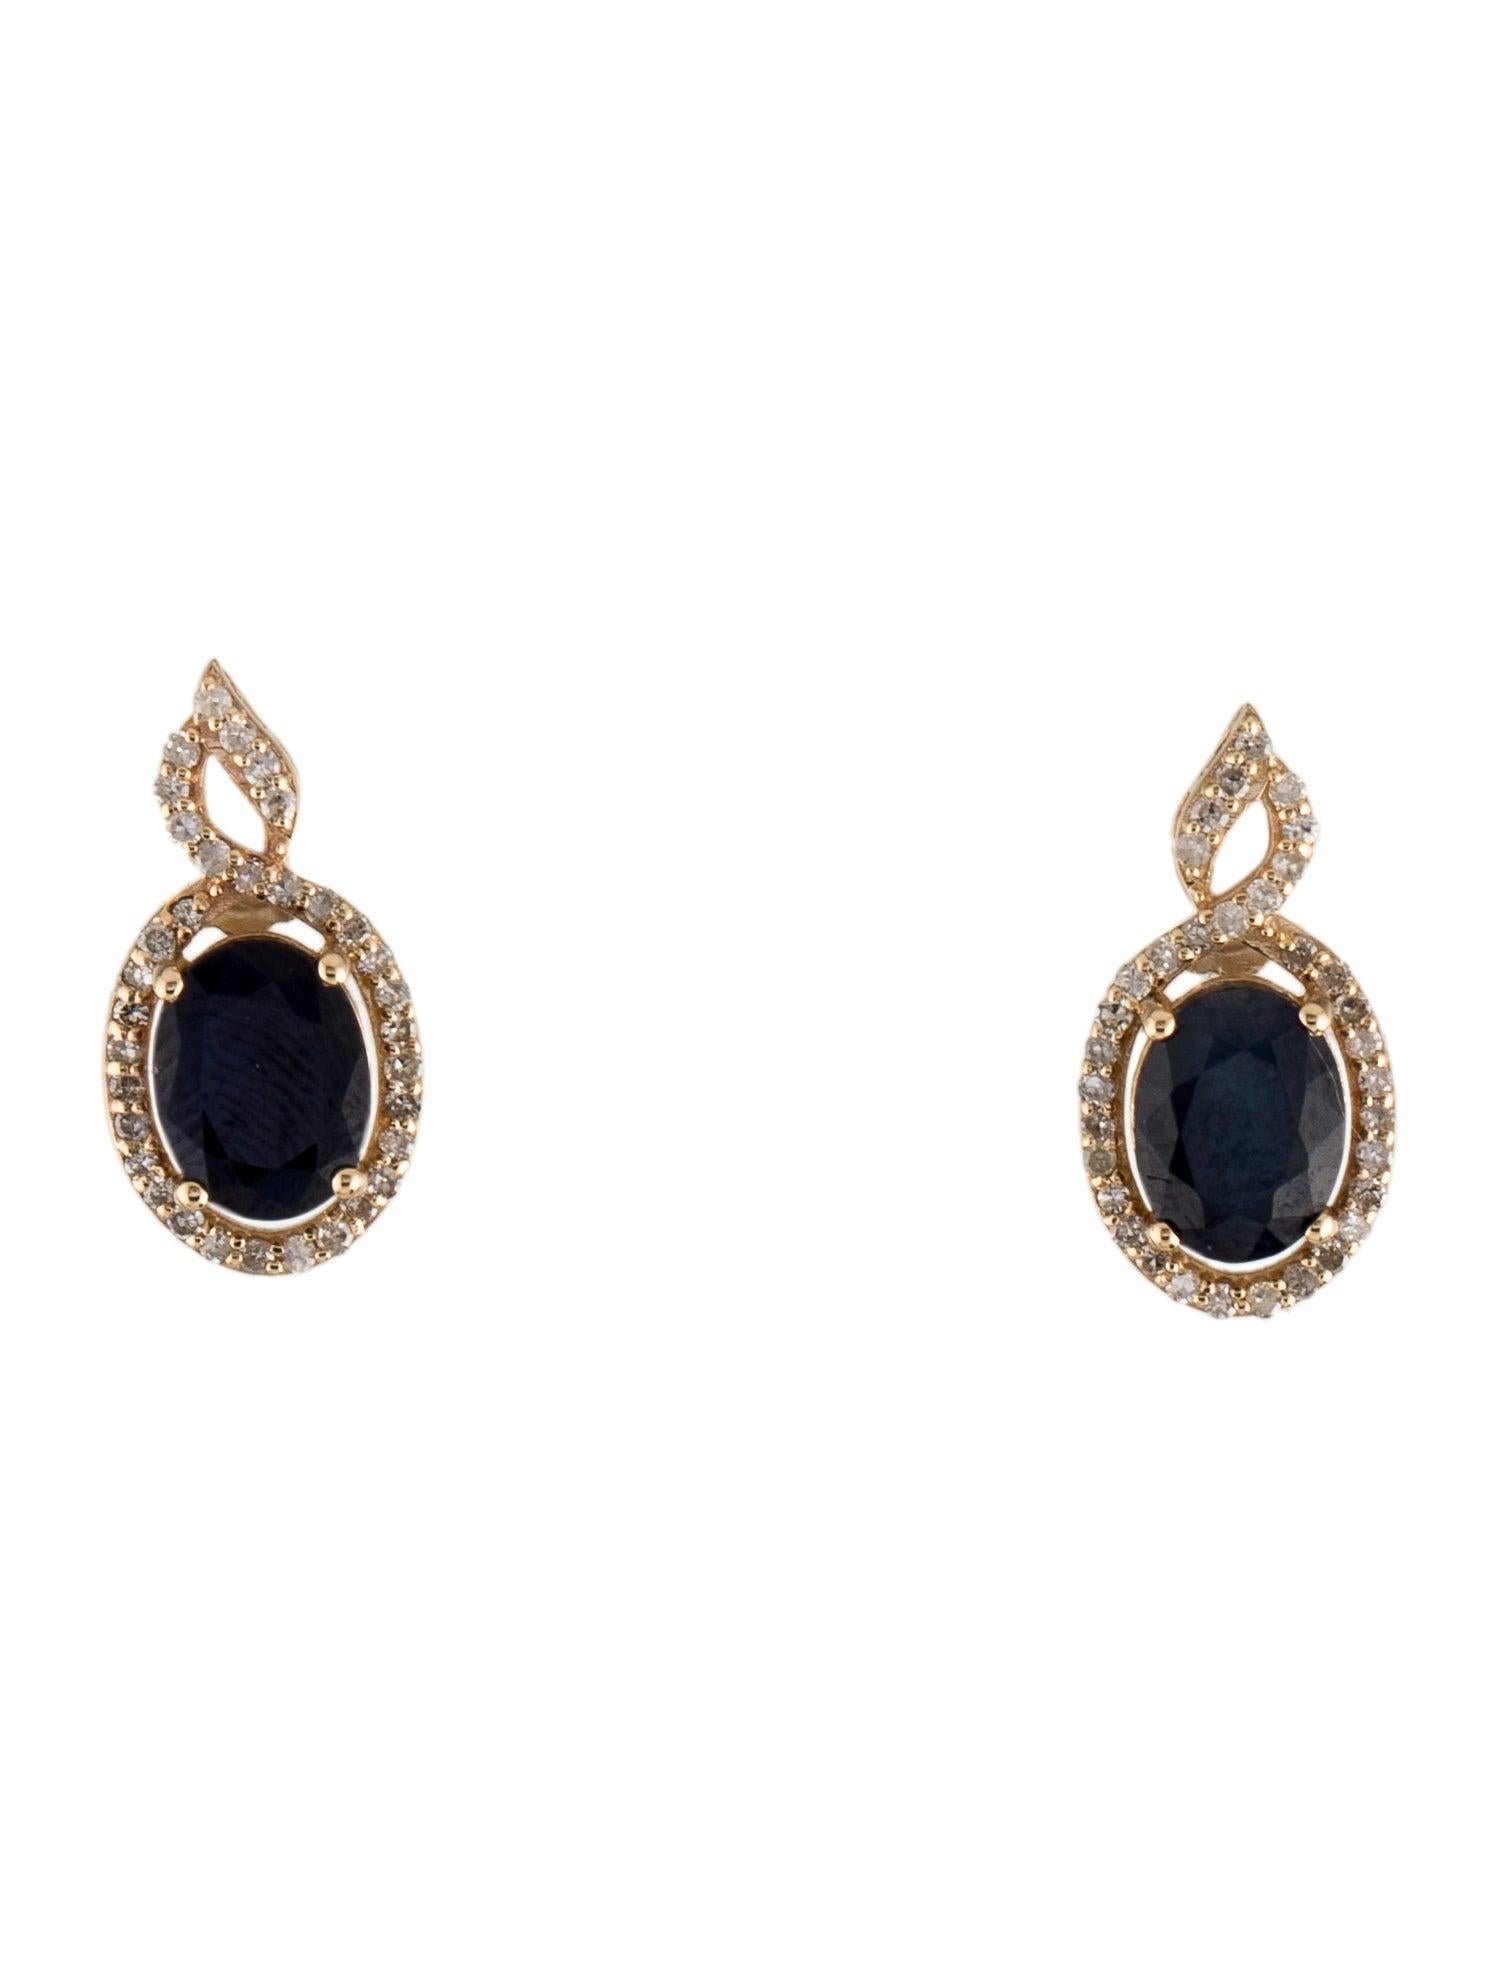 Exquisite 14K Sapphire & Diamond Drop Earrings - Elegant Luxury Jewelry In New Condition For Sale In Holtsville, NY